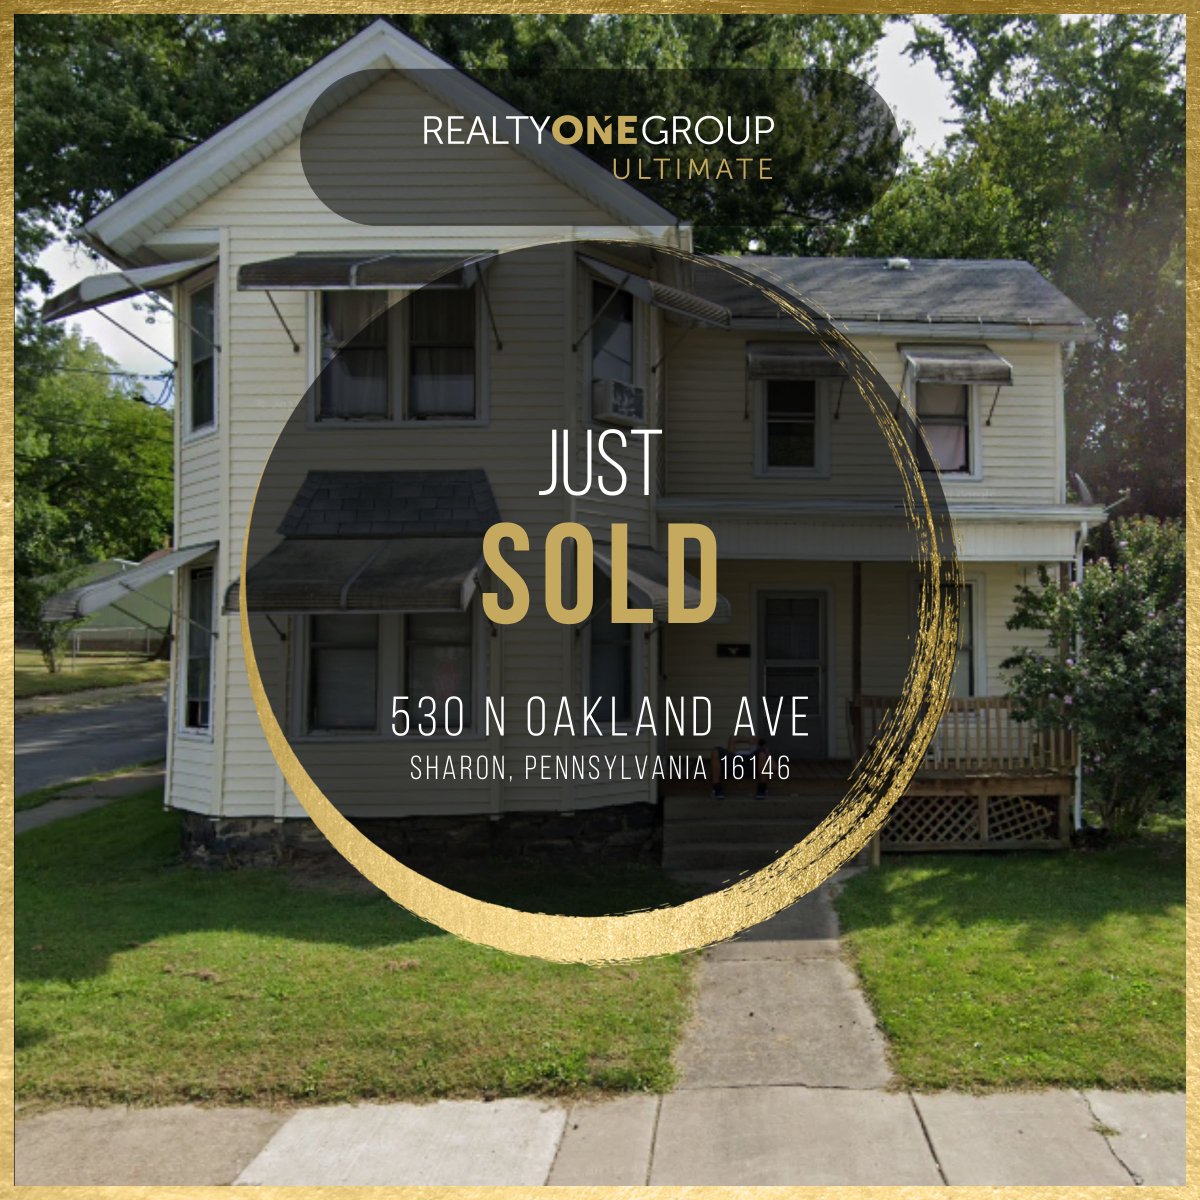 🎉 Another Success Story! Just Sold! 🏡✨

📞 Contact us at 724-201-0514 to start your journey to the perfect home! 

#JustSold #DreamHomeAchieved #RealtyONEGroupUltimate #RealEstateSuccess 🌟🏠